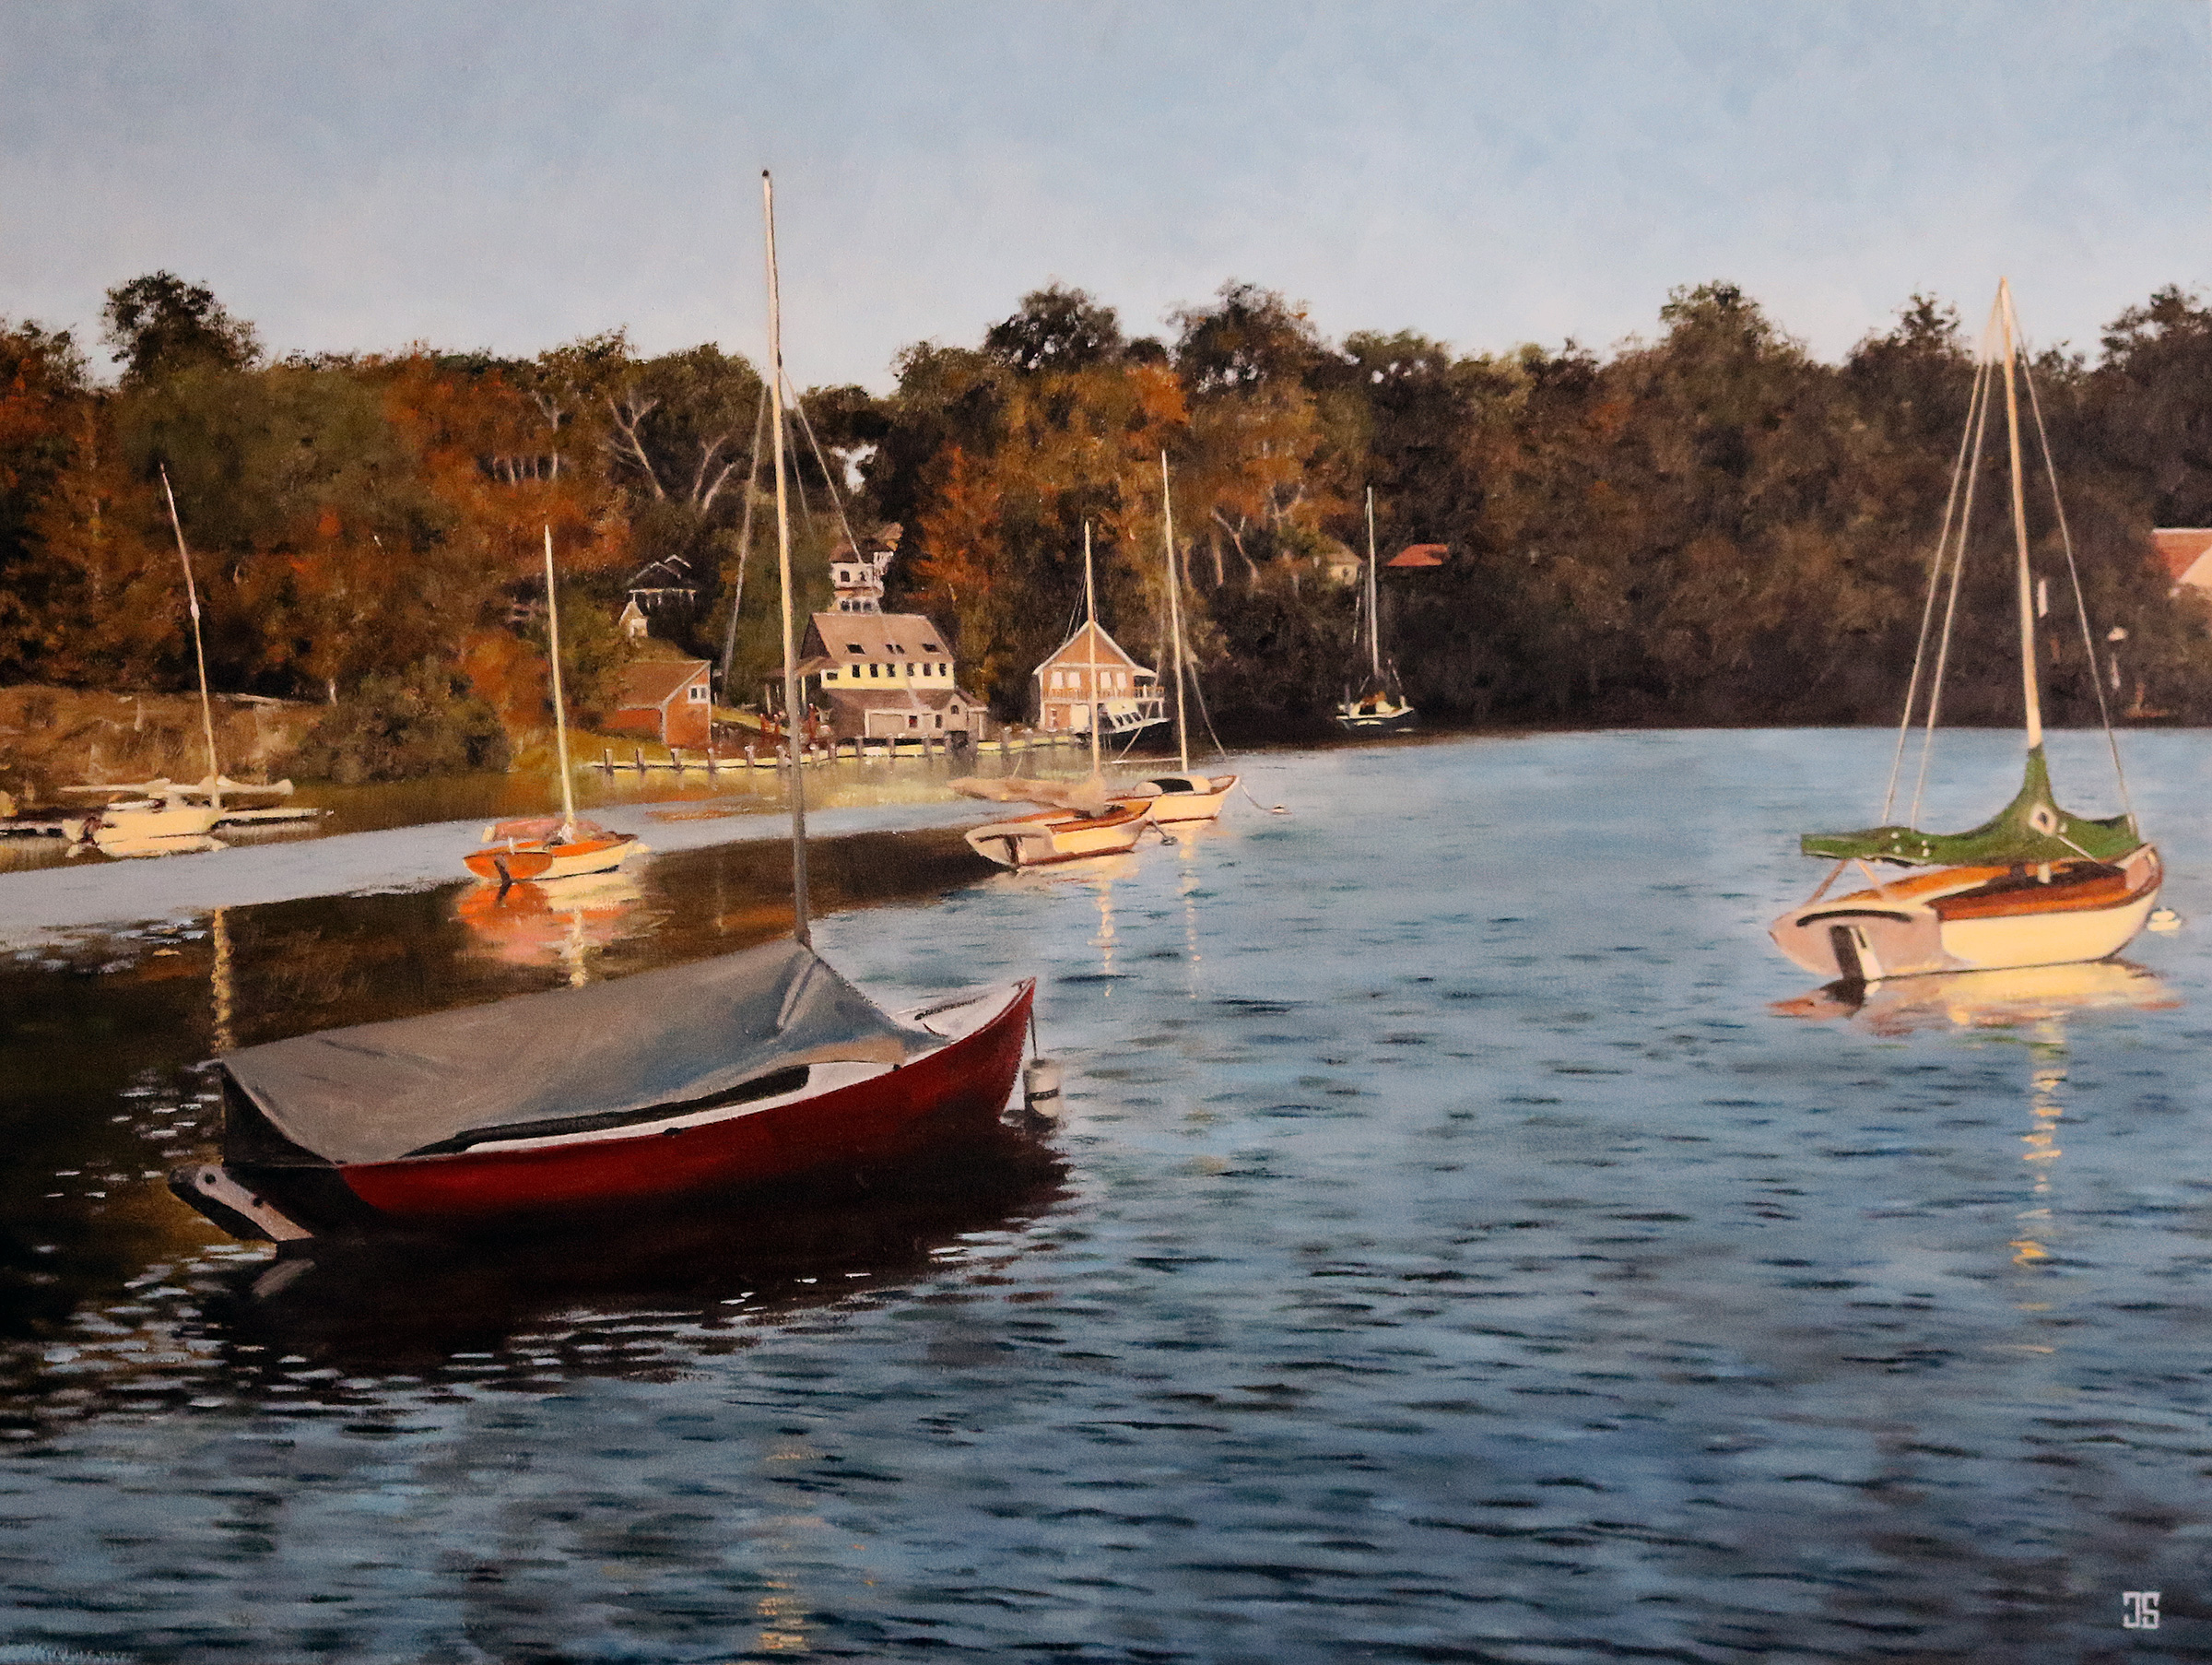 Oil painting "Sailboats in Quissett Harbor, Cape Cod" by Jeffrey Dale Starr